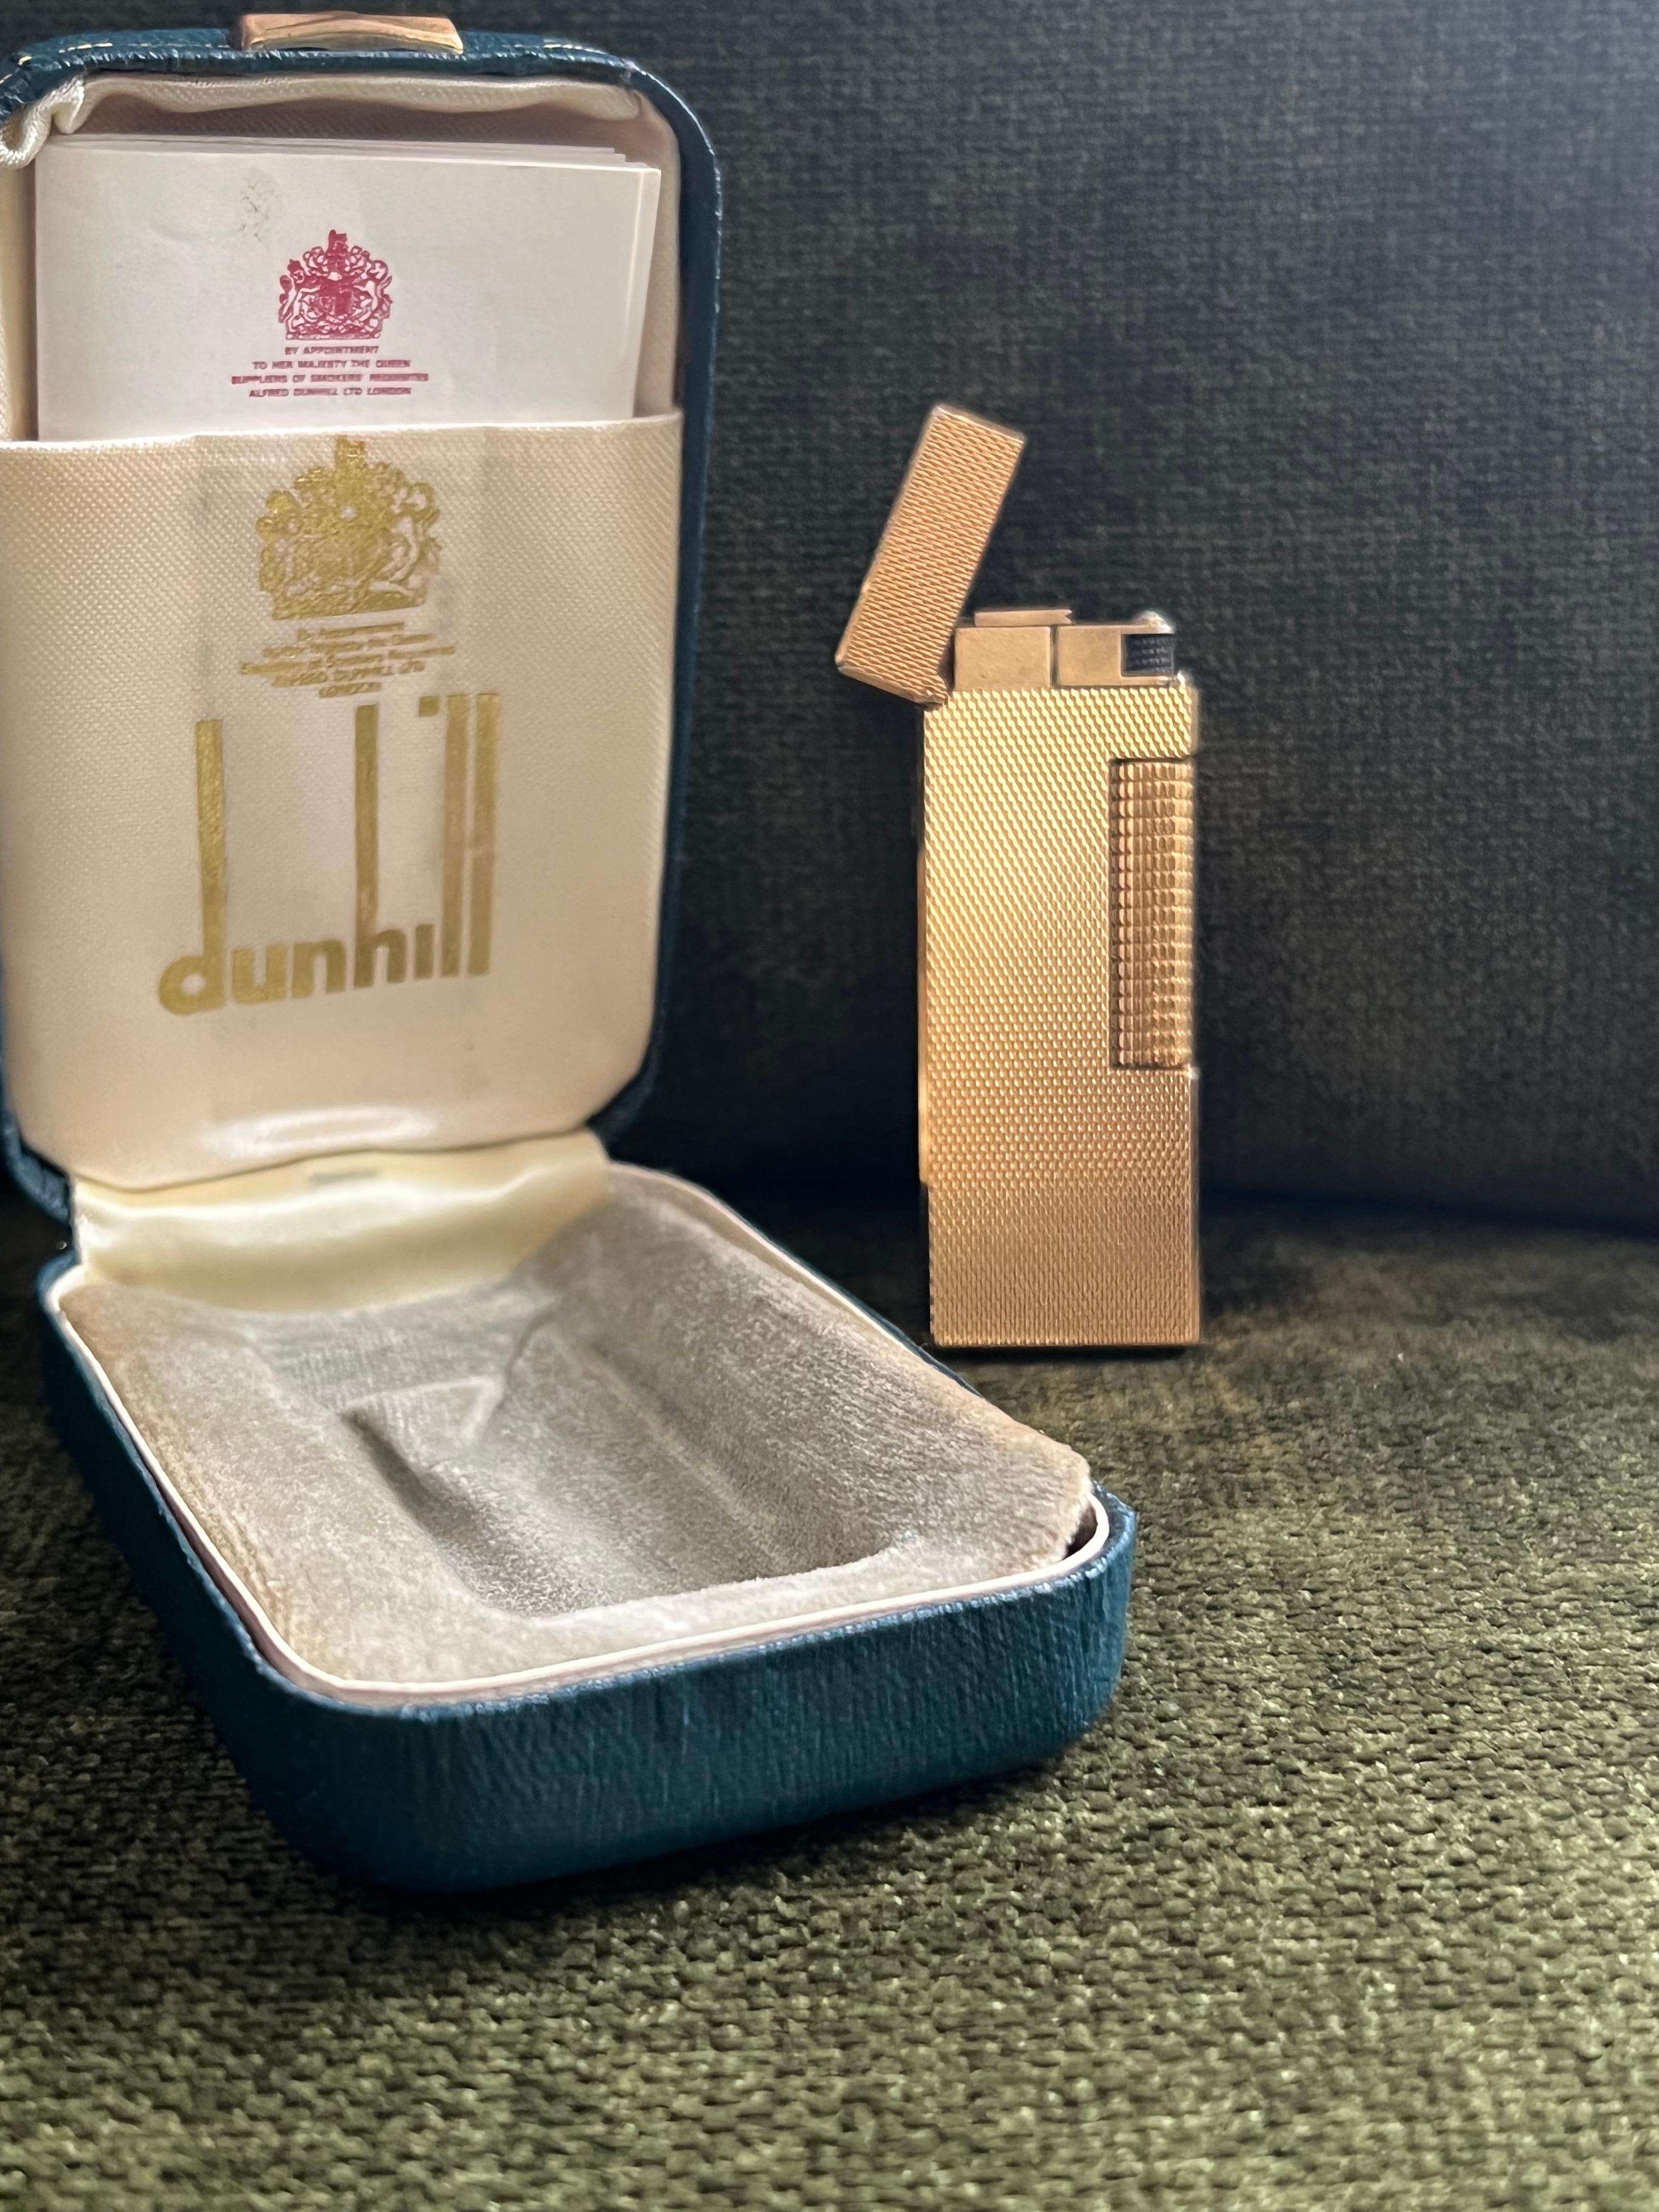 The James Bond Iconic and Rare Vintage Dunhill Gold and Swiss Made Lighter 2